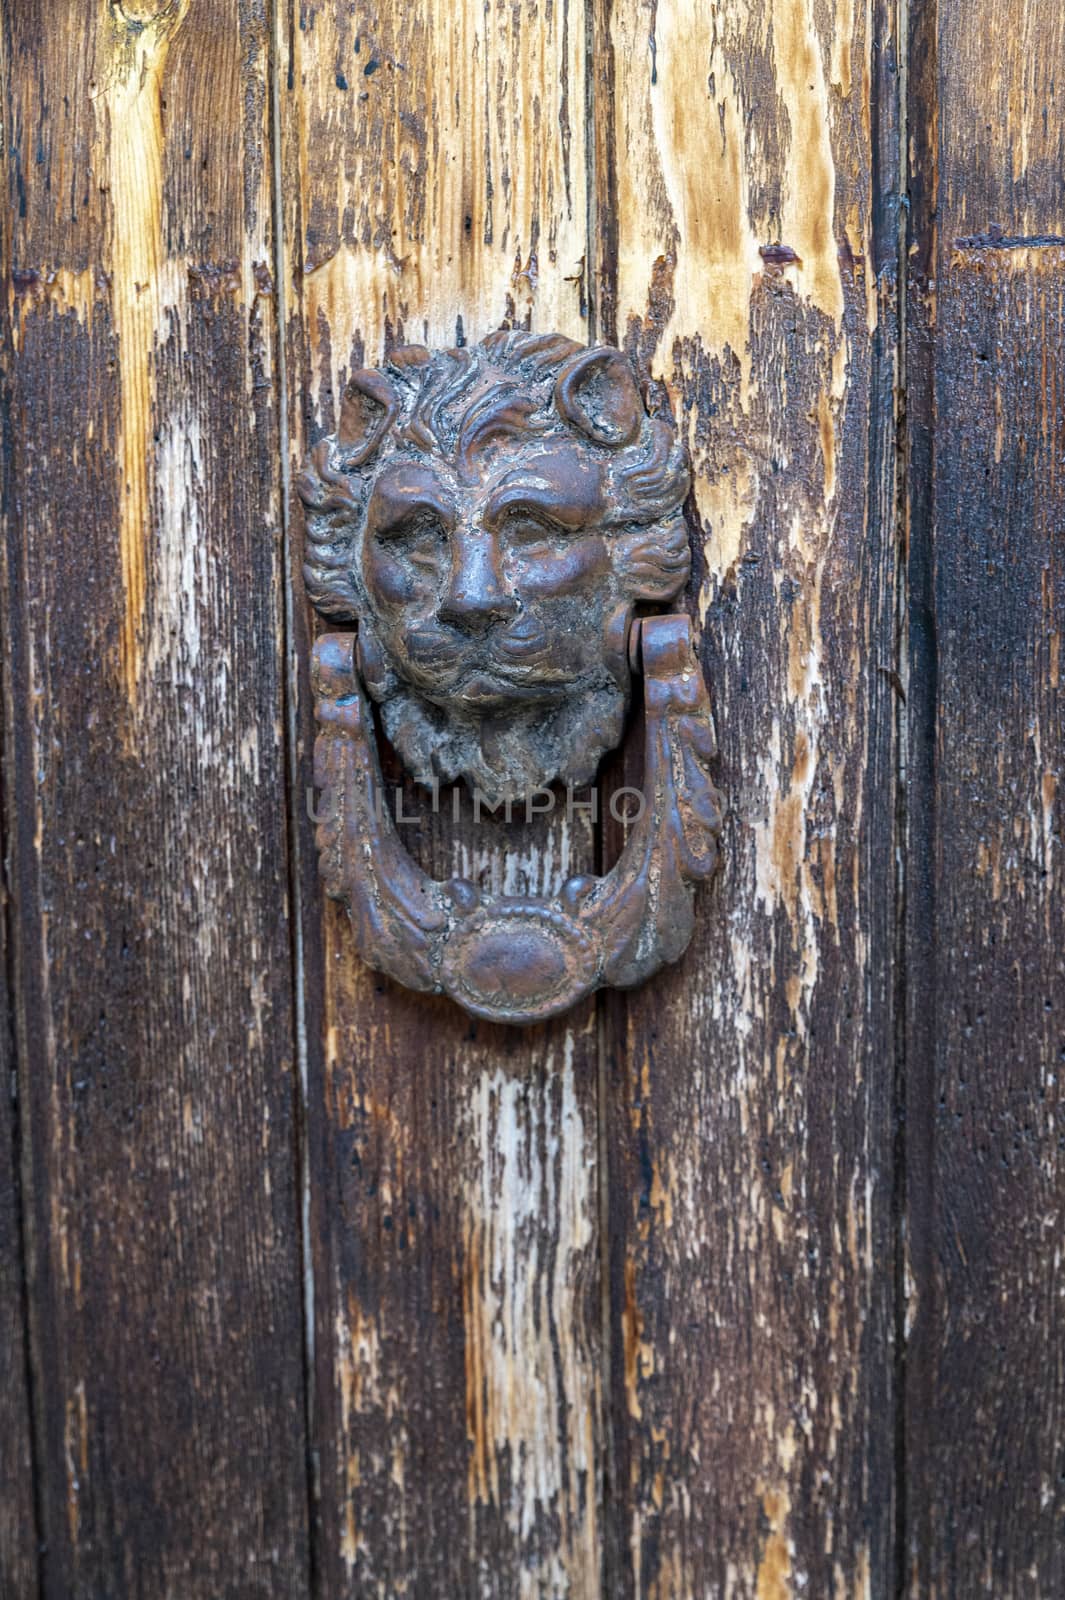 vintage door knocker in the shape of a lion by carfedeph